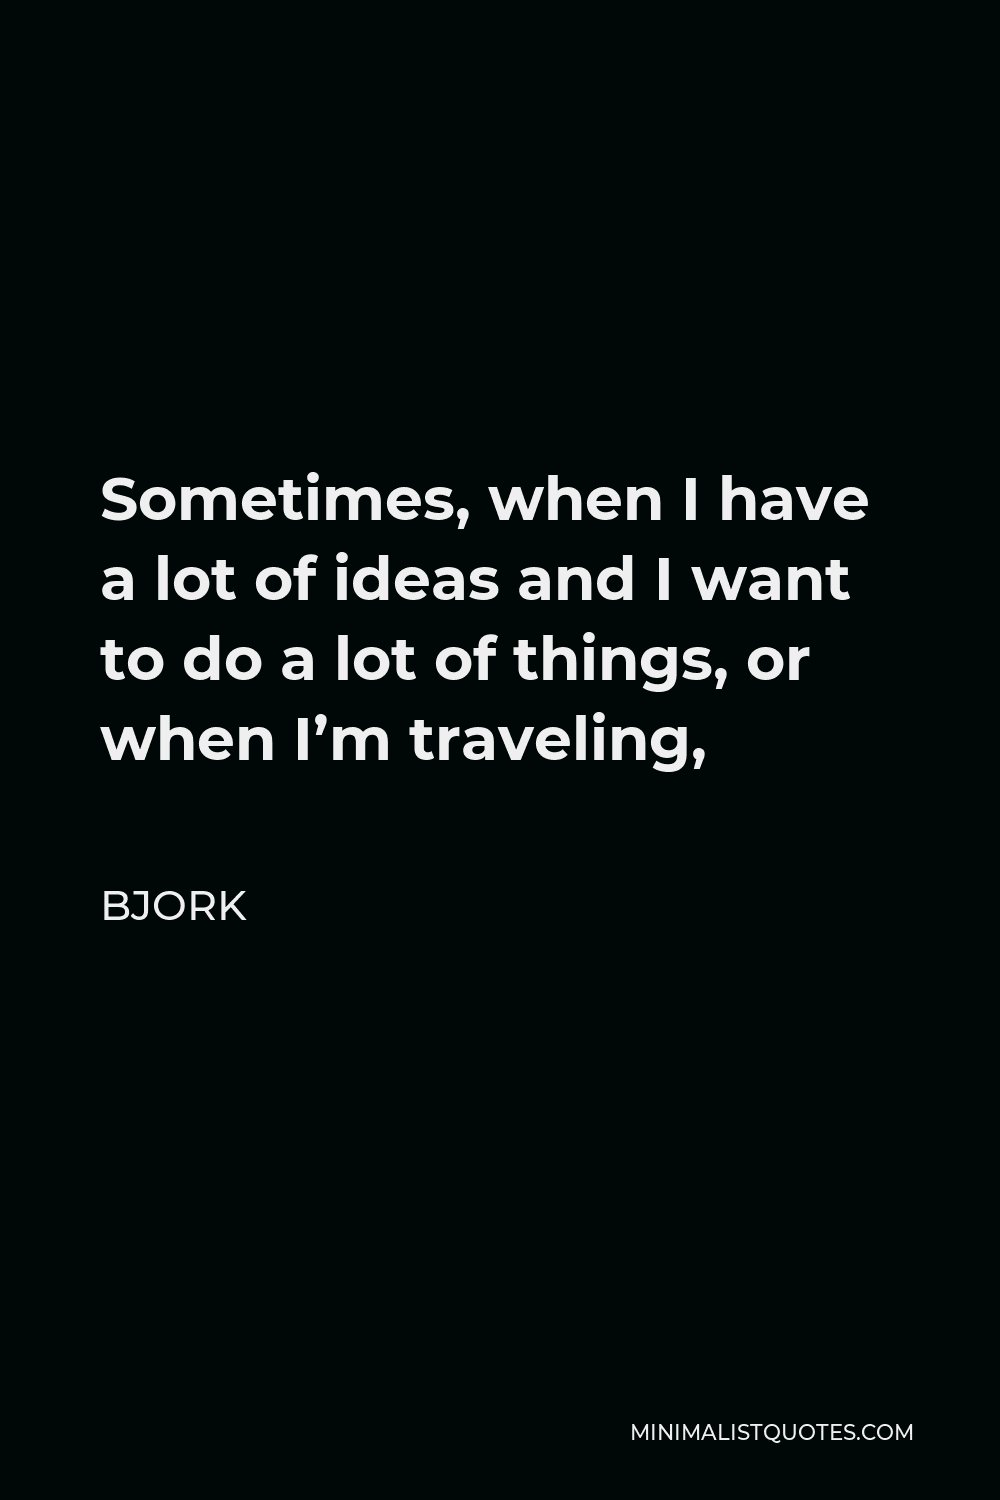 Bjork Quote: Sometimes, when I have a lot of ideas and I want to do a ...